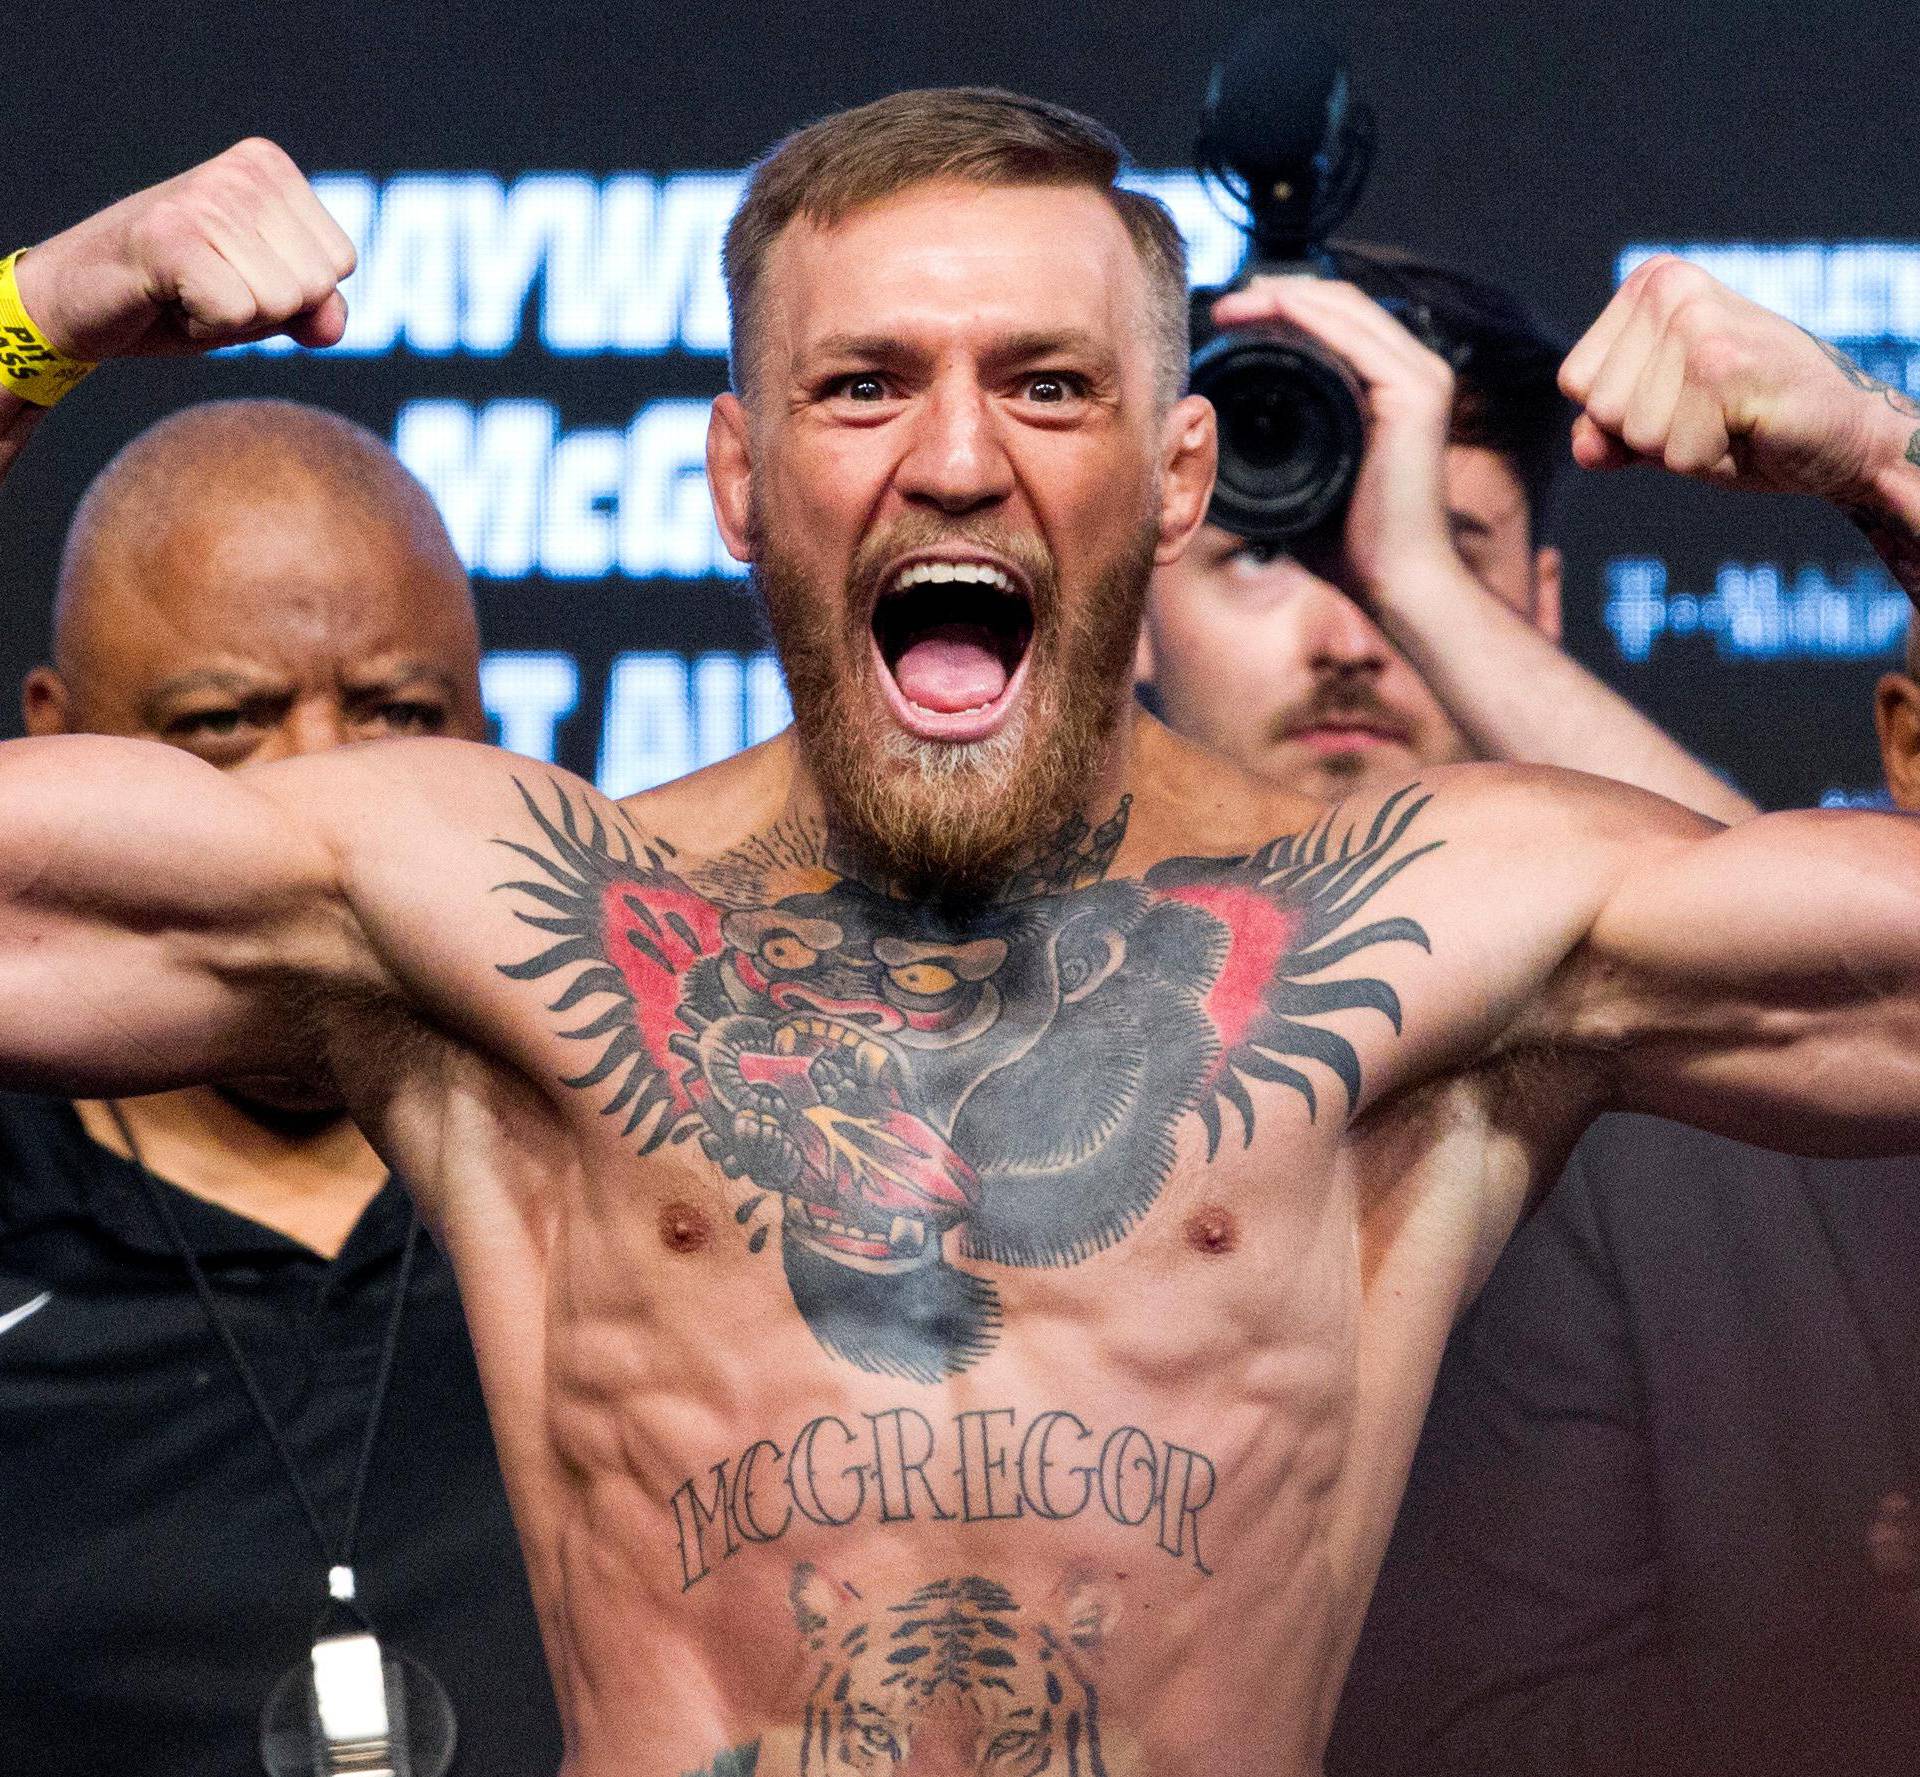 UFC lightweight champion Conor McGregor of Ireland poses on the scale during his official weigh-in at T-Mobile Arena in Las Vegas